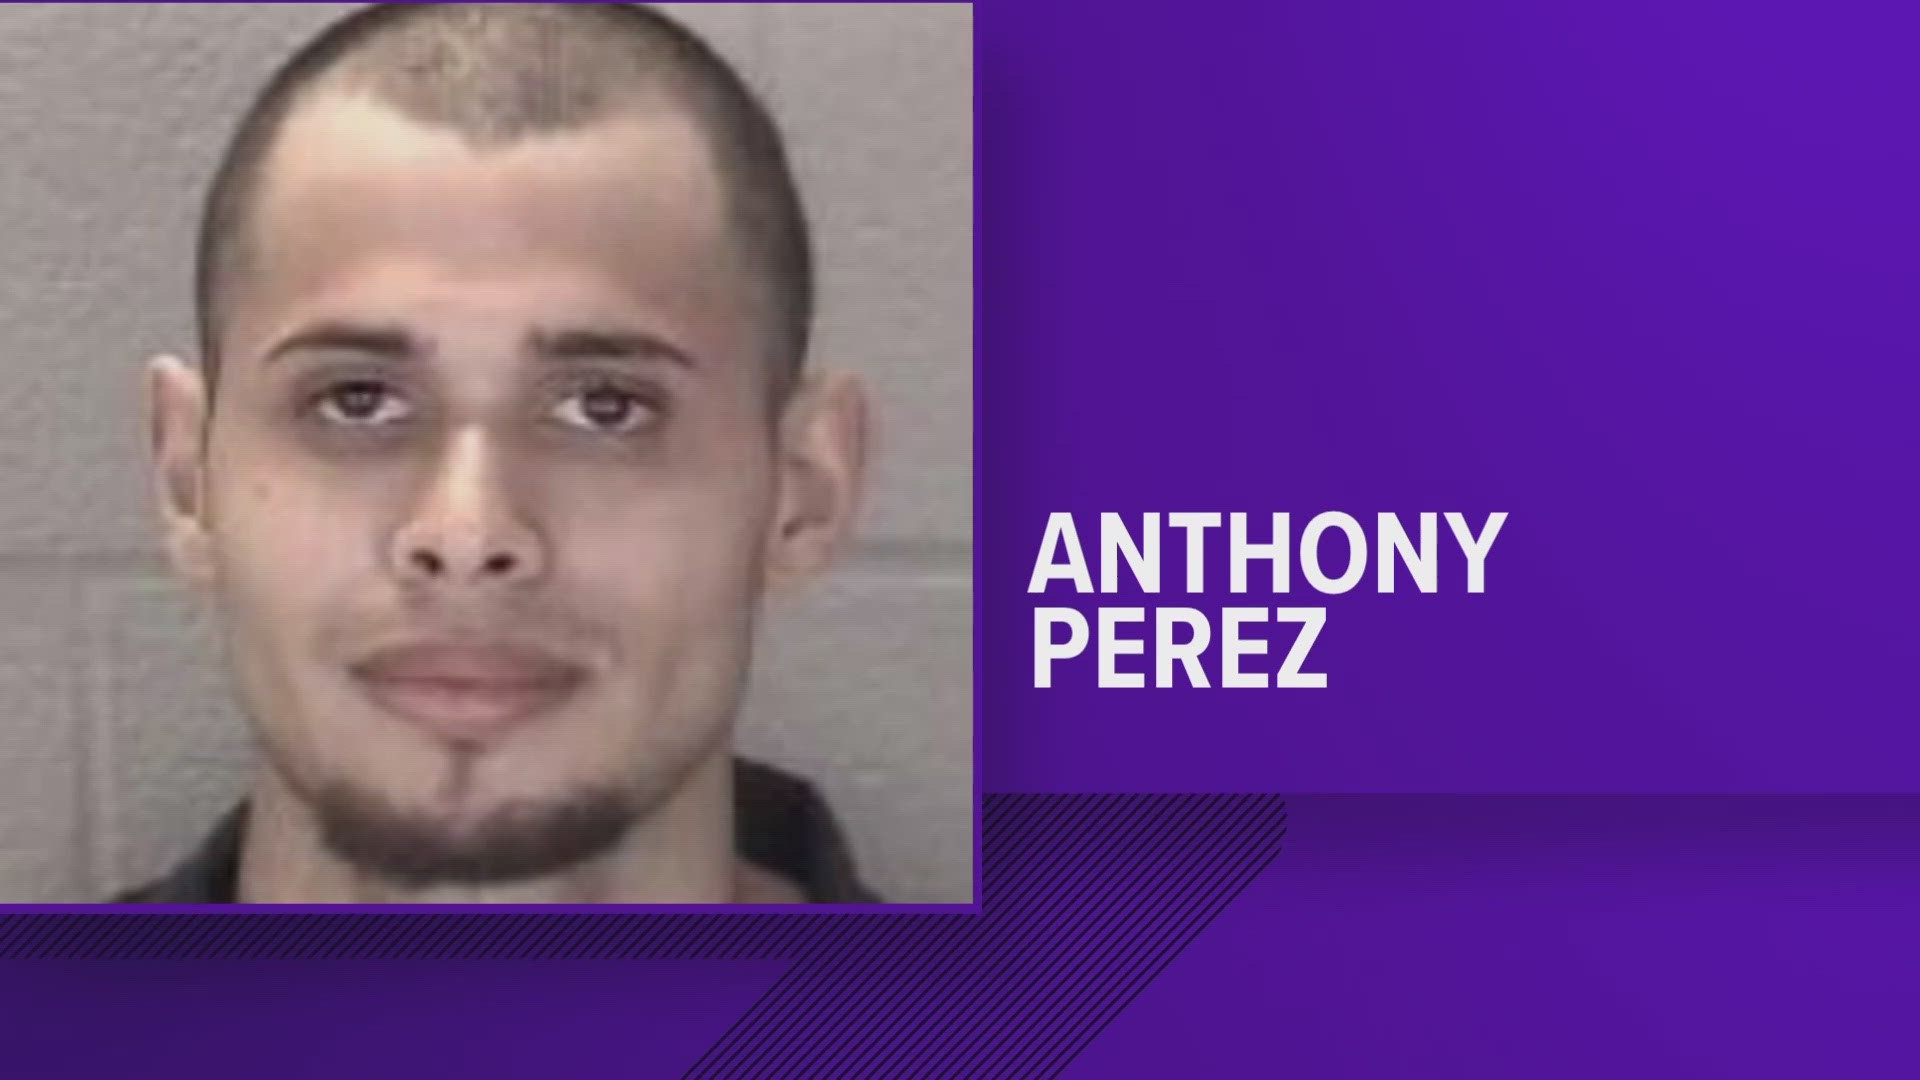 Anthony Perez pleaded guilty to killing 33-year-old Casey Lewis last September in the Walmart parking lot.